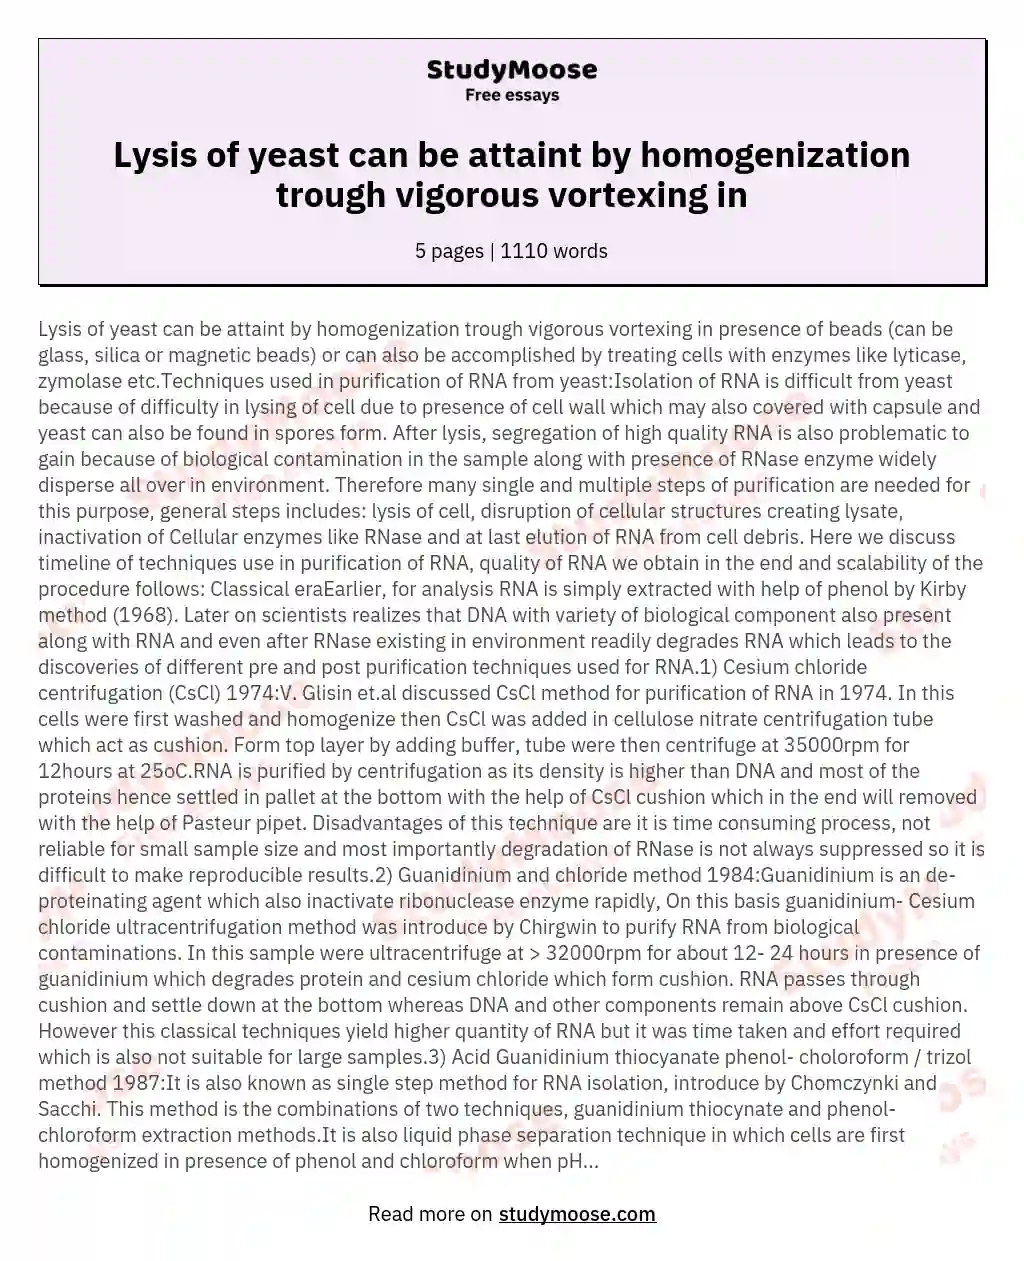 Lysis of yeast can be attaint by homogenization trough vigorous vortexing in